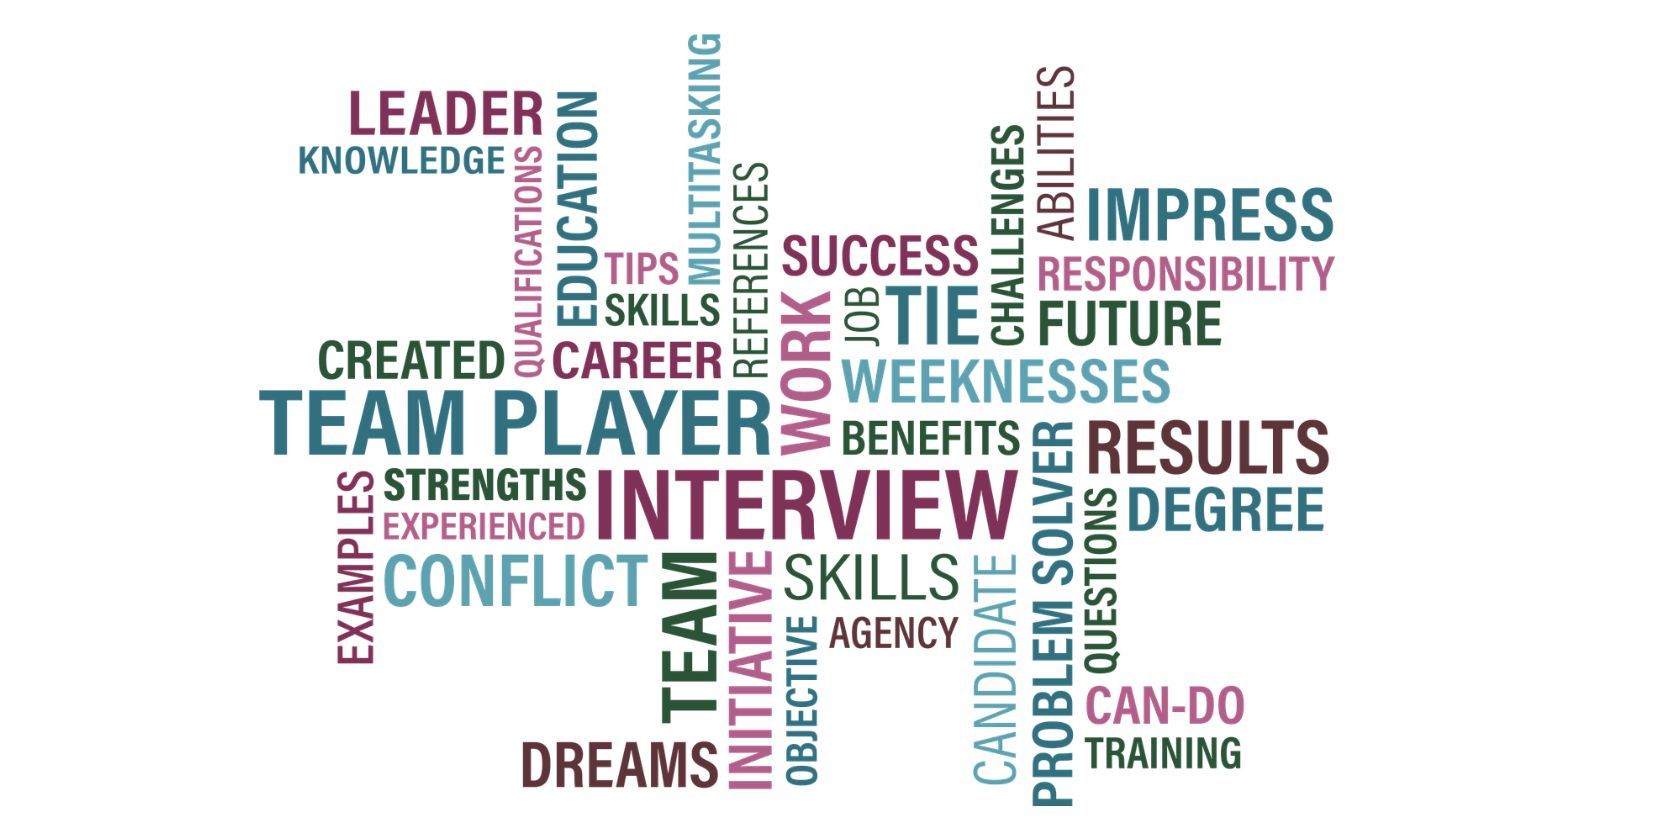 Image of keywords related to career and job search ideas